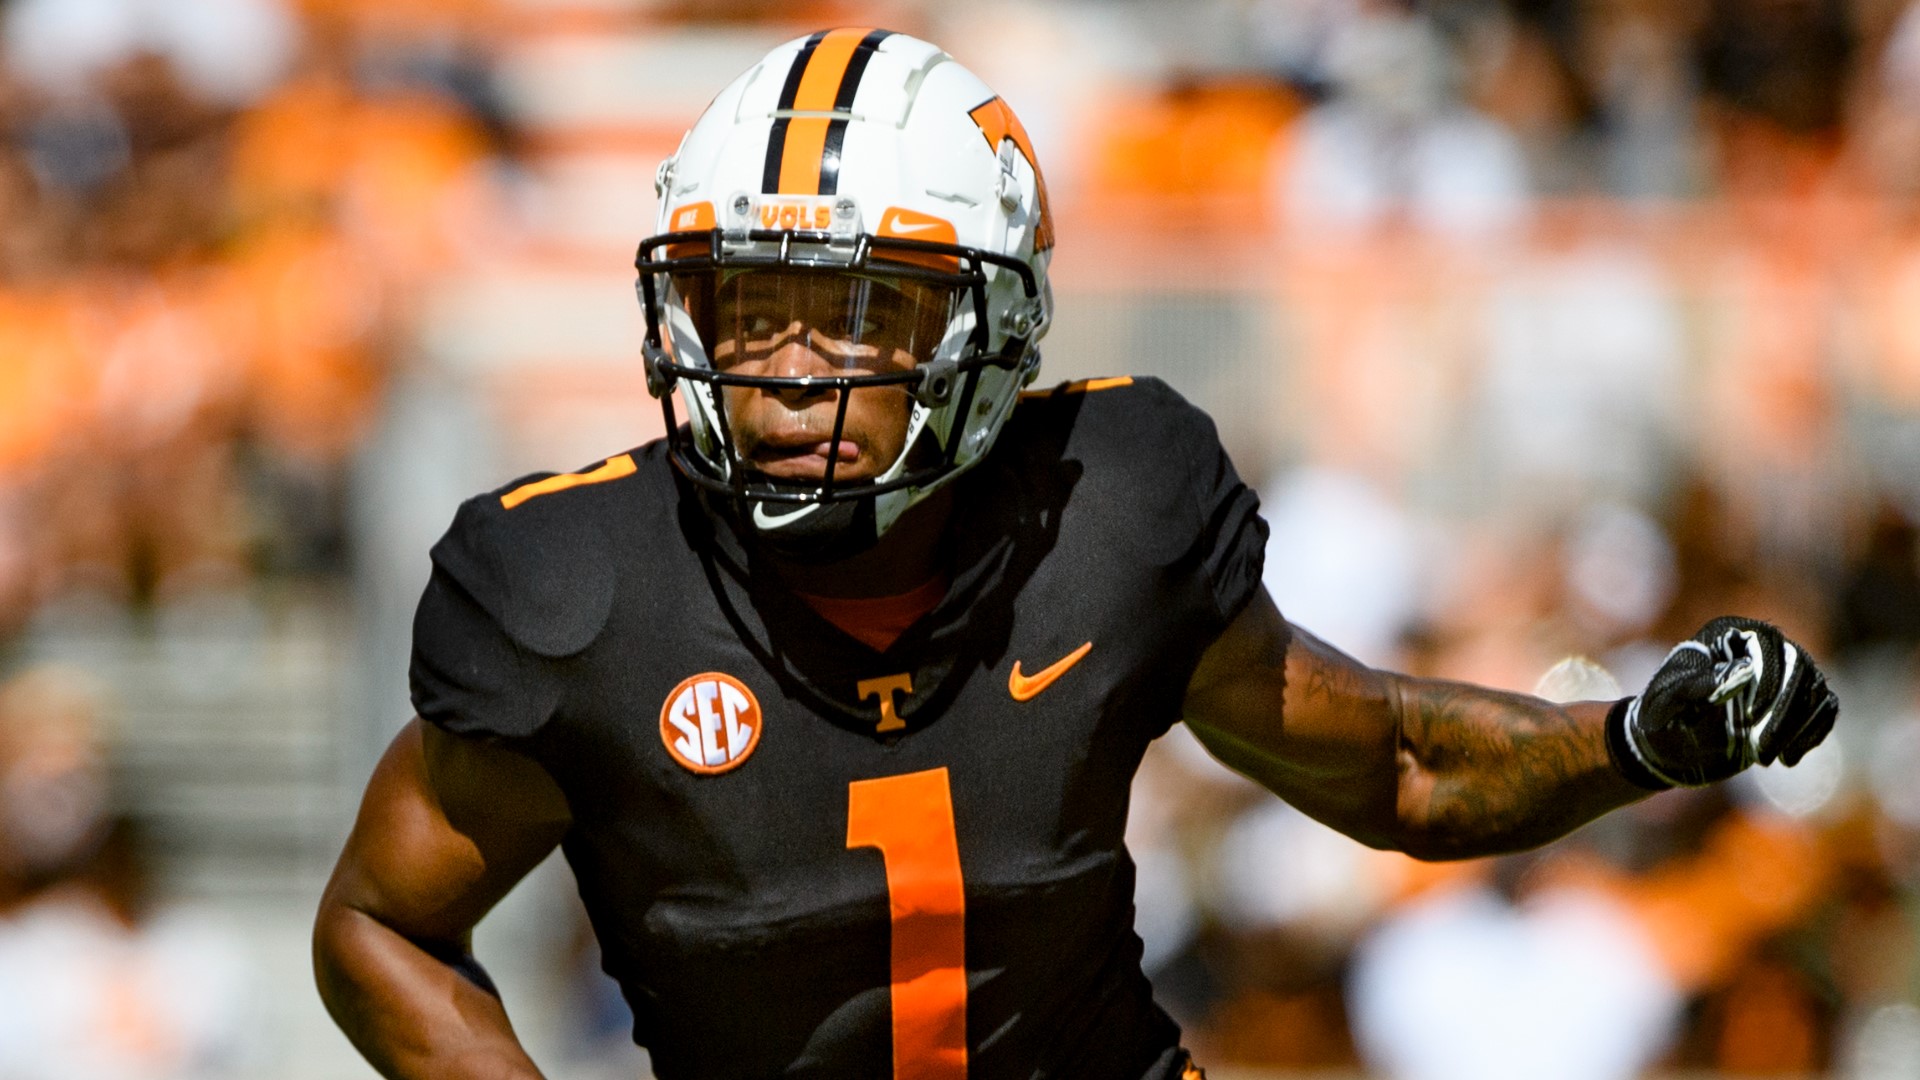 Jones becomes just the second UT player to be named SEC Special Teams Player of the Year in program history.